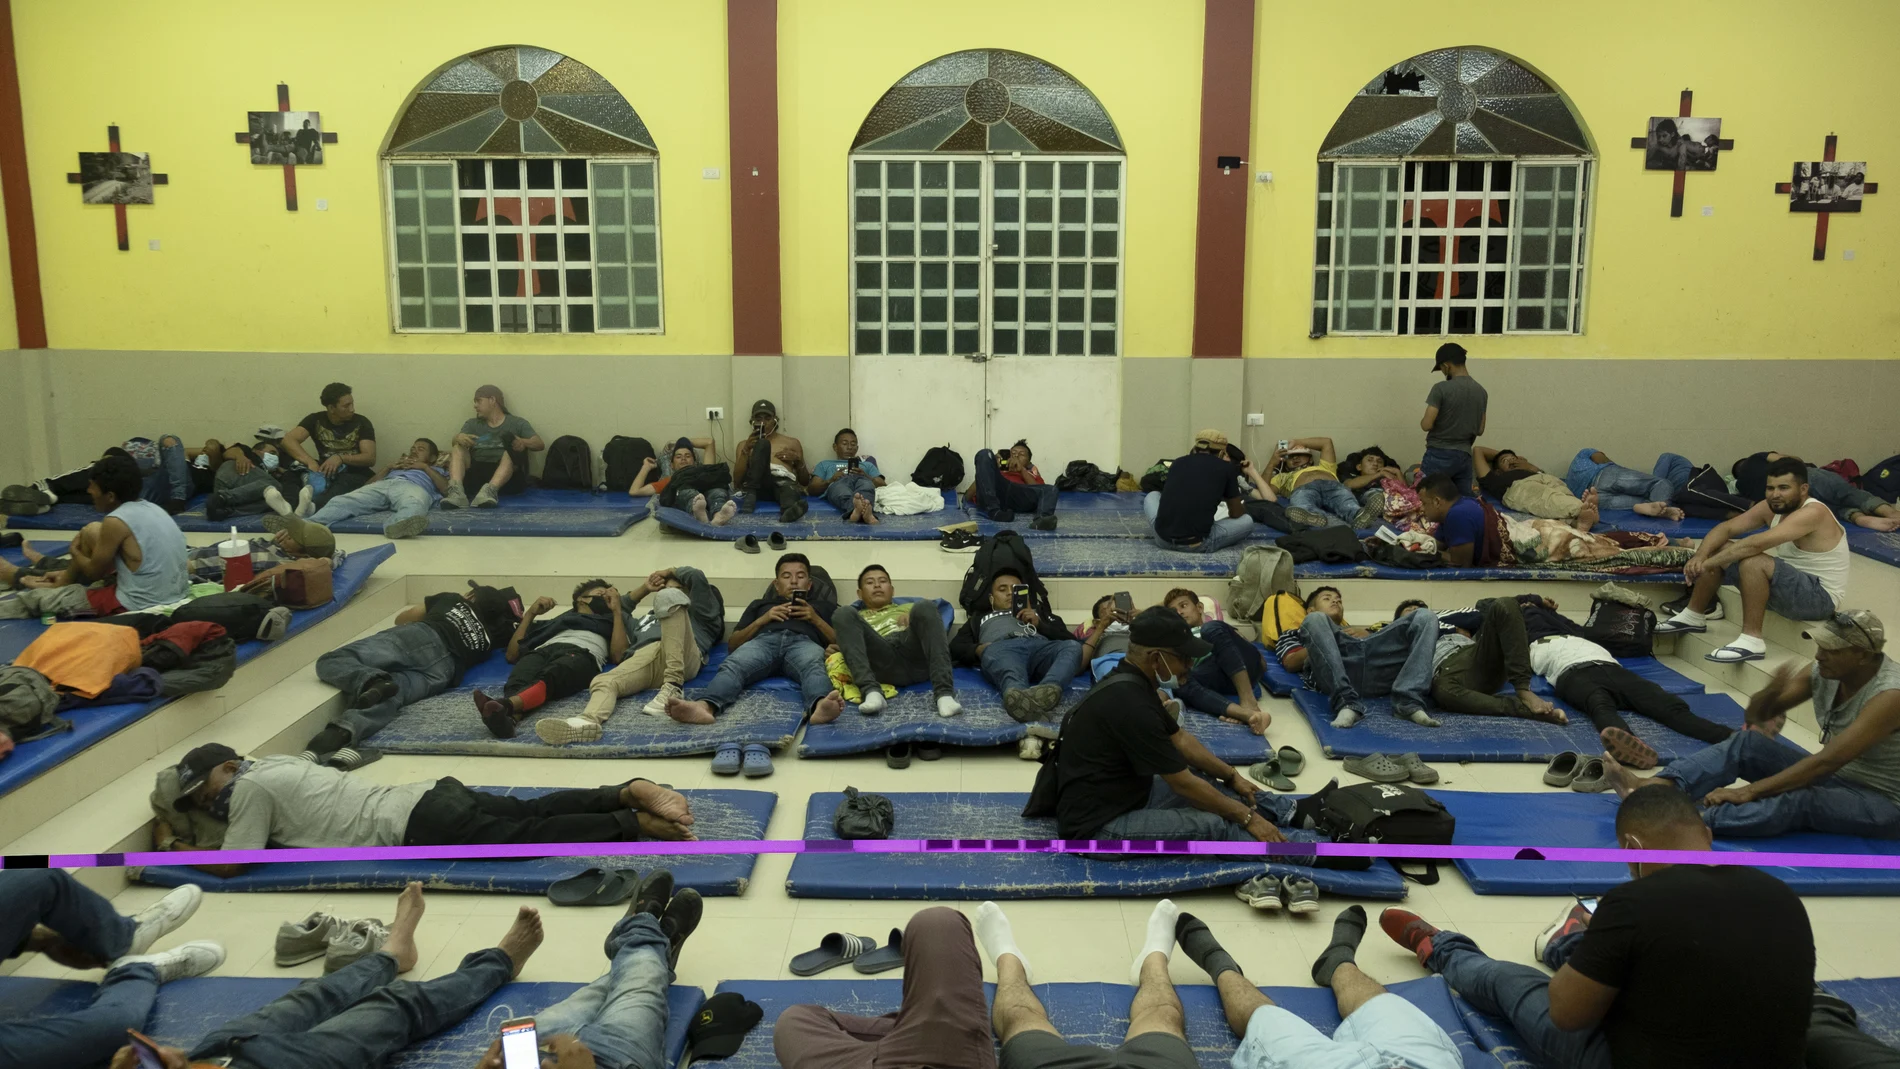 Central American migrants rest at the La 72 shelter in Tenosique, Tabasco state, Mexico, Tuesday, Feb. 9, 2021. When Guatemalan authorities blocked a migrant caravan last month drawing international attention the flow of migrants might have seemed to slow down, but a growing number of small groups continue to flow daily from Central America into Mexico. (AP Photo/Isabel Mateos)